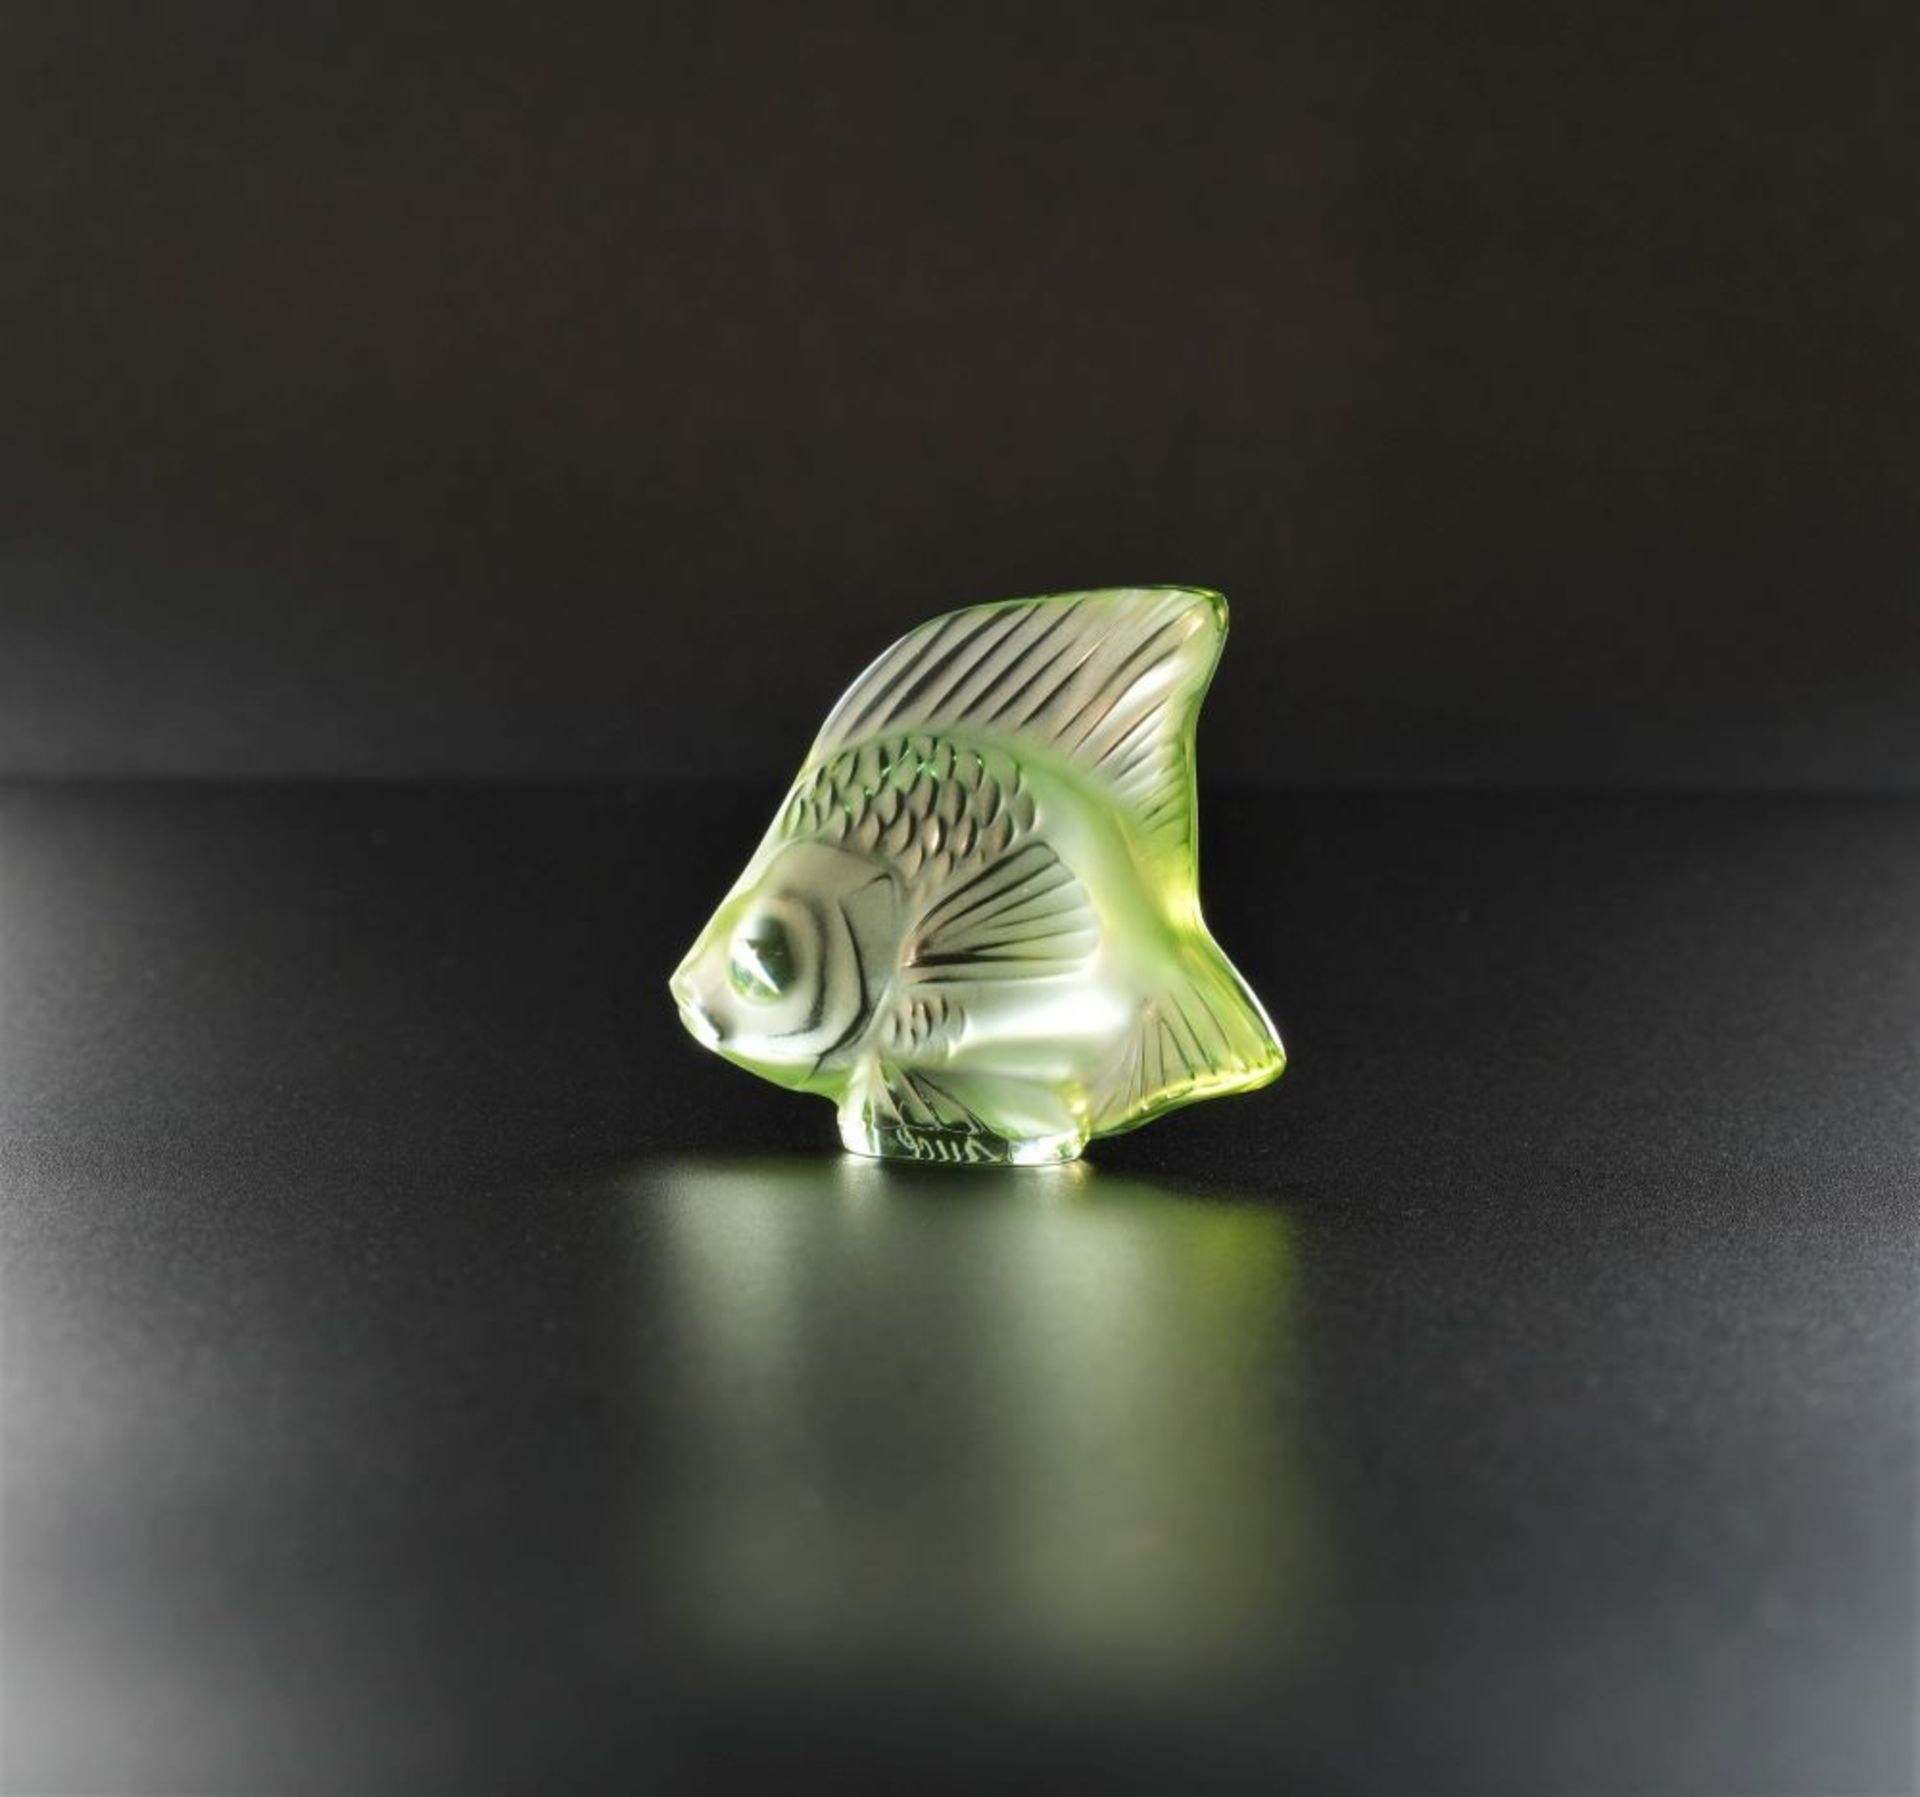 A LALIQUE Extra Small Fish Figure in Green Crystal from the Original 1912 Design by Rene Lalique.